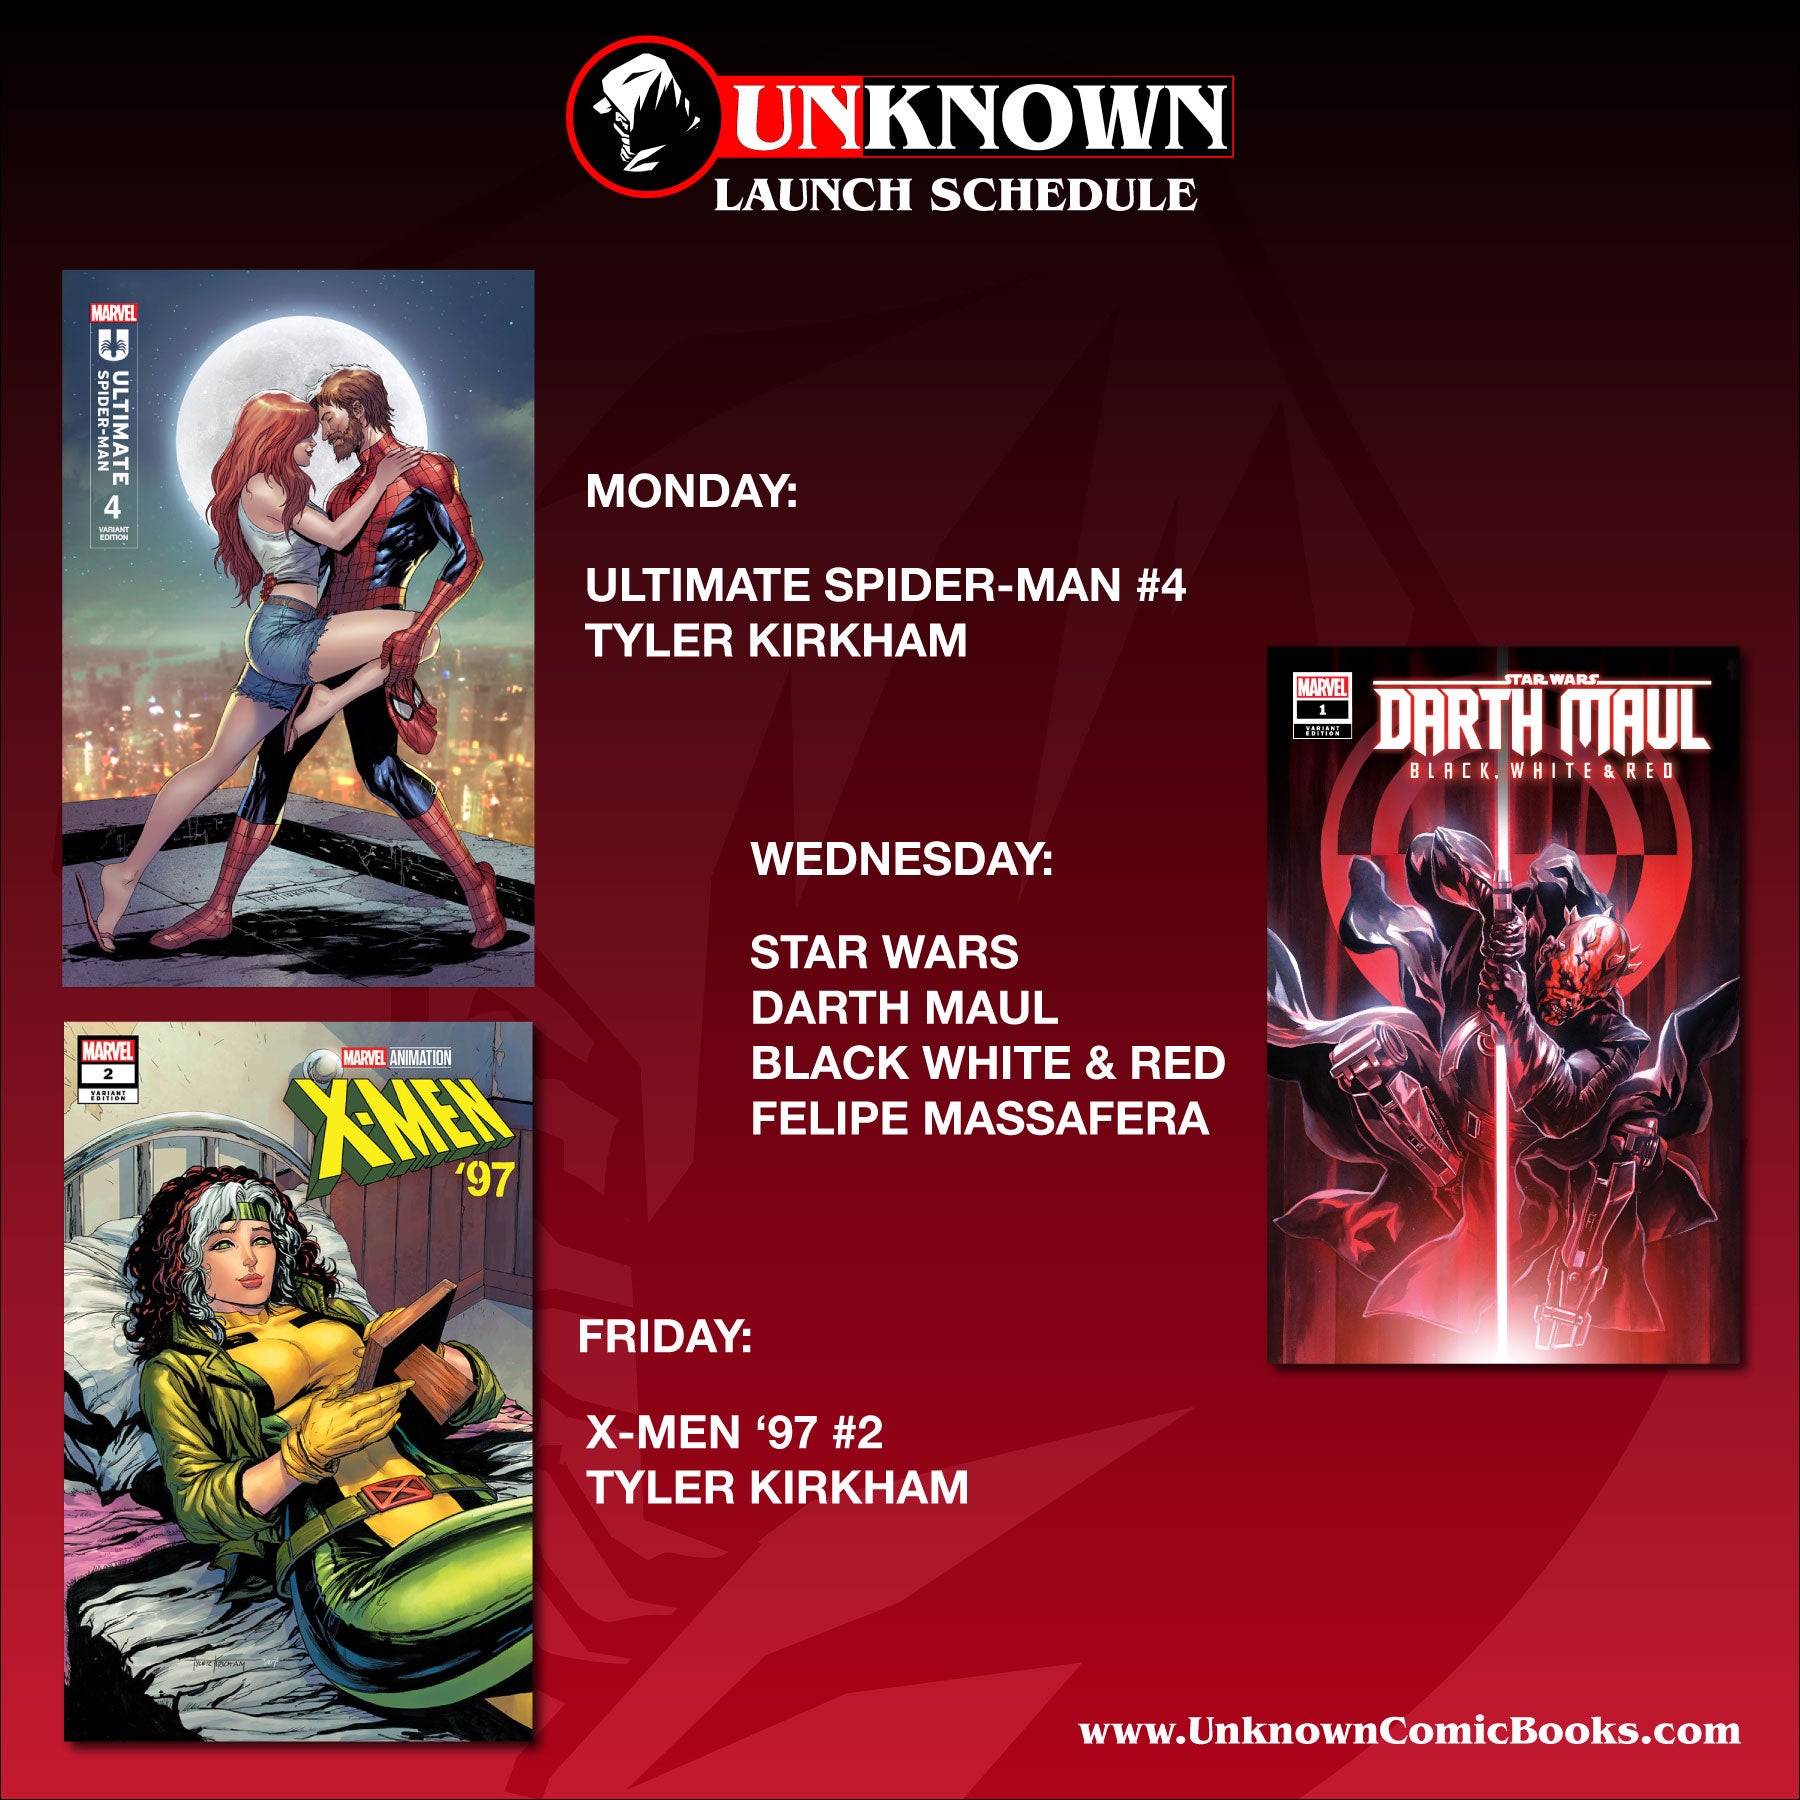 Unknown Comics Gears Up for Another Week of Exclusive Delights!